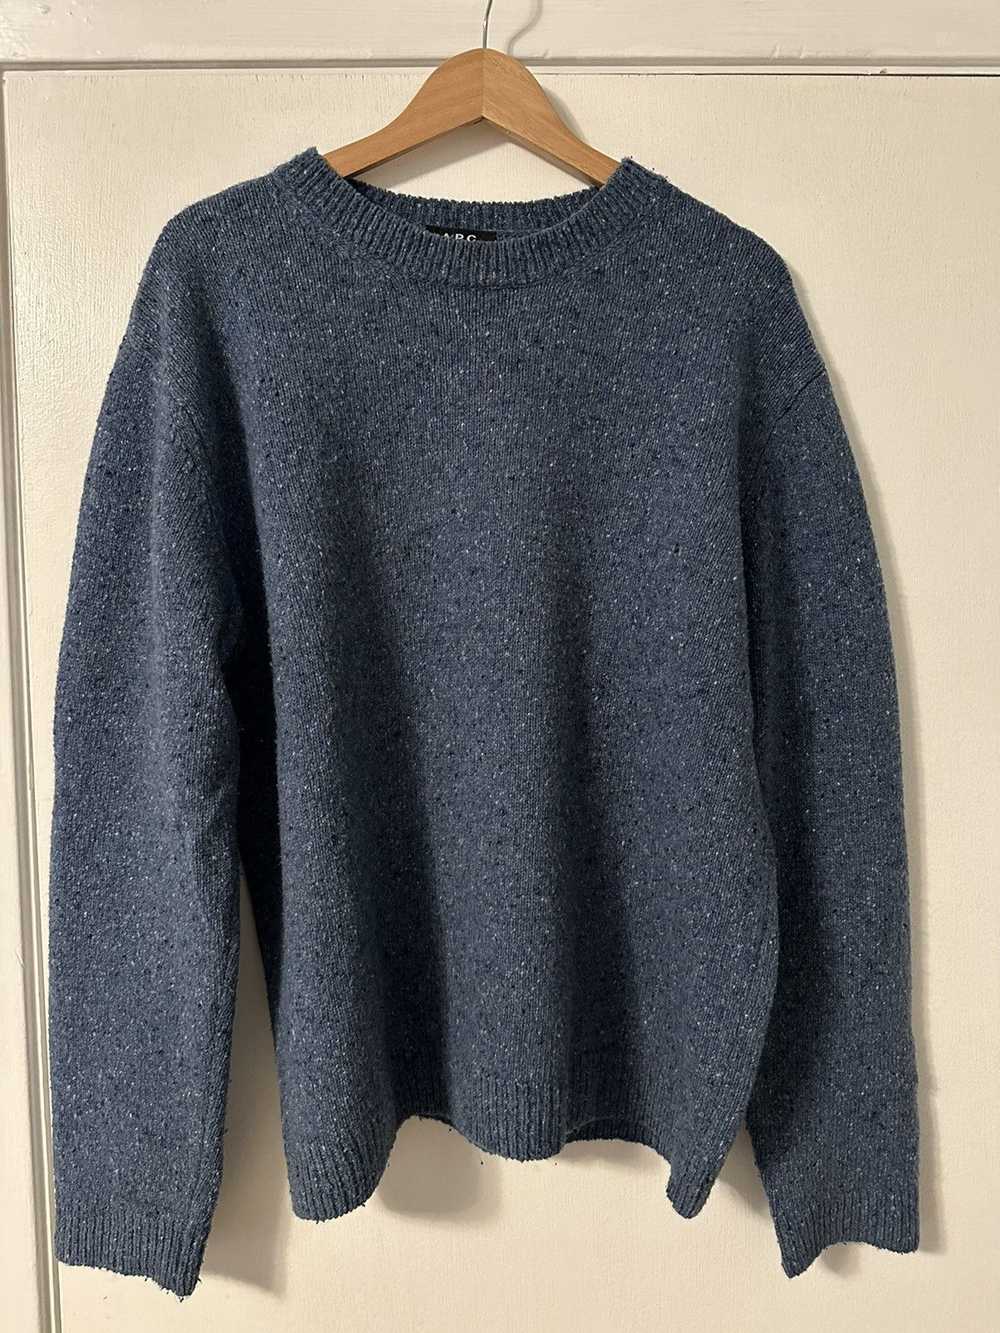 A.P.C. Chandler Sweater - image 1